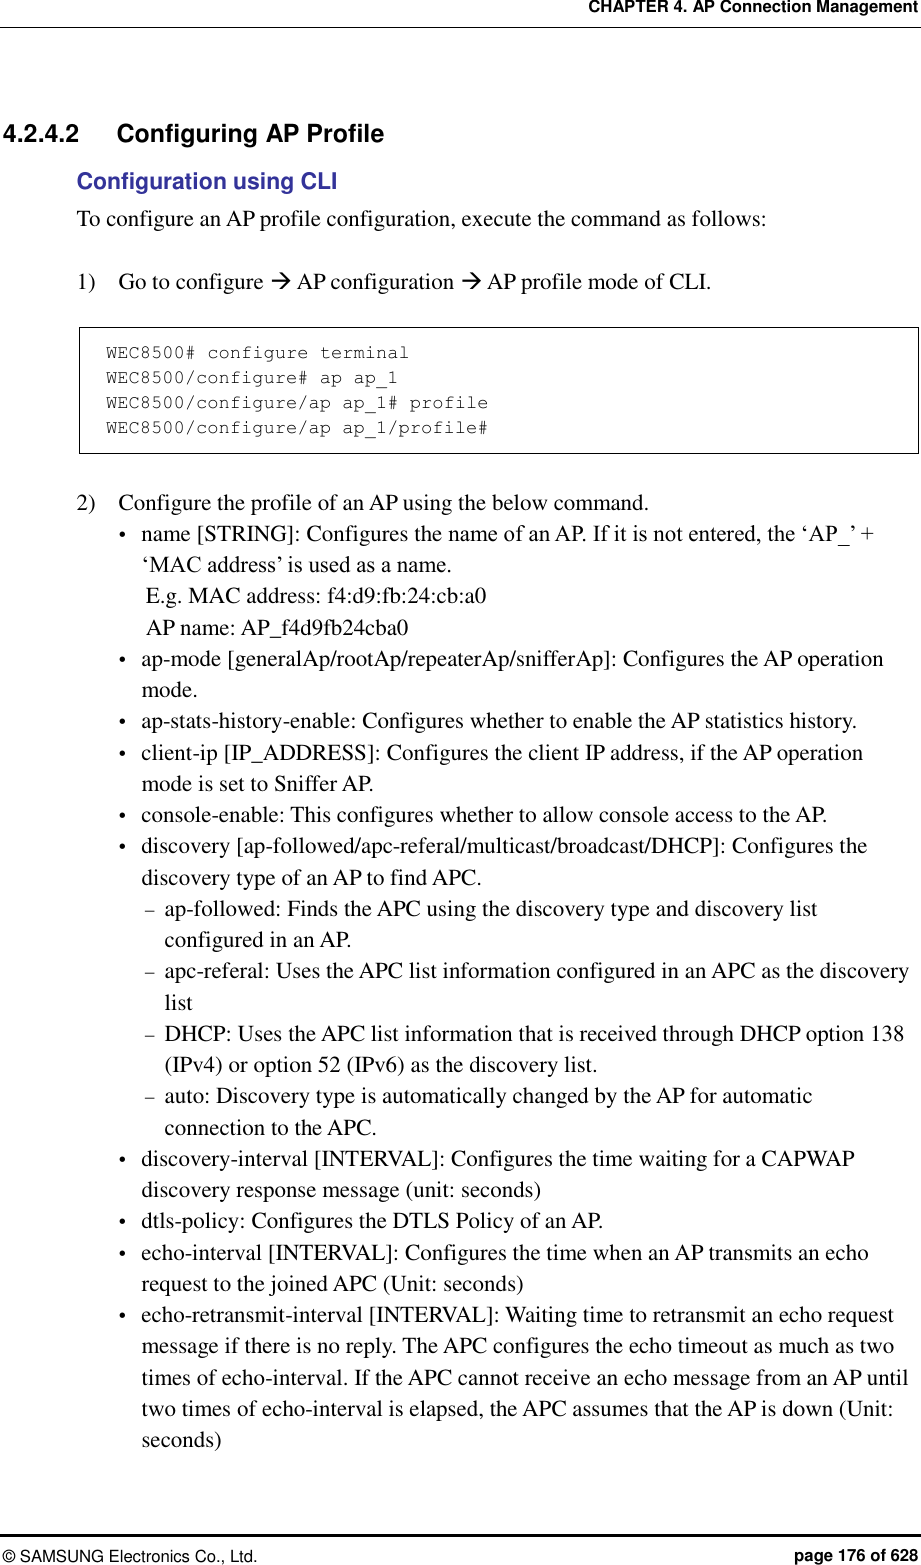 CHAPTER 4. AP Connection Management ©  SAMSUNG Electronics Co., Ltd.  page 176 of 628 4.2.4.2  Configuring AP Profile   Configuration using CLI To configure an AP profile configuration, execute the command as follows:  1)    Go to configure  AP configuration  AP profile mode of CLI.  WEC8500# configure terminal WEC8500/configure# ap ap_1 WEC8500/configure/ap ap_1# profile WEC8500/configure/ap ap_1/profile#  2)    Configure the profile of an AP using the below command.  name [STRING]: Configures the name of an AP. If it is not entered, the ‘AP_’ + ‘MAC address’ is used as a name. E.g. MAC address: f4:d9:fb:24:cb:a0 AP name: AP_f4d9fb24cba0  ap-mode [generalAp/rootAp/repeaterAp/snifferAp]: Configures the AP operation mode.  ap-stats-history-enable: Configures whether to enable the AP statistics history.  client-ip [IP_ADDRESS]: Configures the client IP address, if the AP operation mode is set to Sniffer AP.  console-enable: This configures whether to allow console access to the AP.  discovery [ap-followed/apc-referal/multicast/broadcast/DHCP]: Configures the discovery type of an AP to find APC.  ap-followed: Finds the APC using the discovery type and discovery list configured in an AP.  apc-referal: Uses the APC list information configured in an APC as the discovery list  DHCP: Uses the APC list information that is received through DHCP option 138 (IPv4) or option 52 (IPv6) as the discovery list.    auto: Discovery type is automatically changed by the AP for automatic connection to the APC.  discovery-interval [INTERVAL]: Configures the time waiting for a CAPWAP discovery response message (unit: seconds)  dtls-policy: Configures the DTLS Policy of an AP.  echo-interval [INTERVAL]: Configures the time when an AP transmits an echo request to the joined APC (Unit: seconds)  echo-retransmit-interval [INTERVAL]: Waiting time to retransmit an echo request message if there is no reply. The APC configures the echo timeout as much as two times of echo-interval. If the APC cannot receive an echo message from an AP until two times of echo-interval is elapsed, the APC assumes that the AP is down (Unit: seconds) 